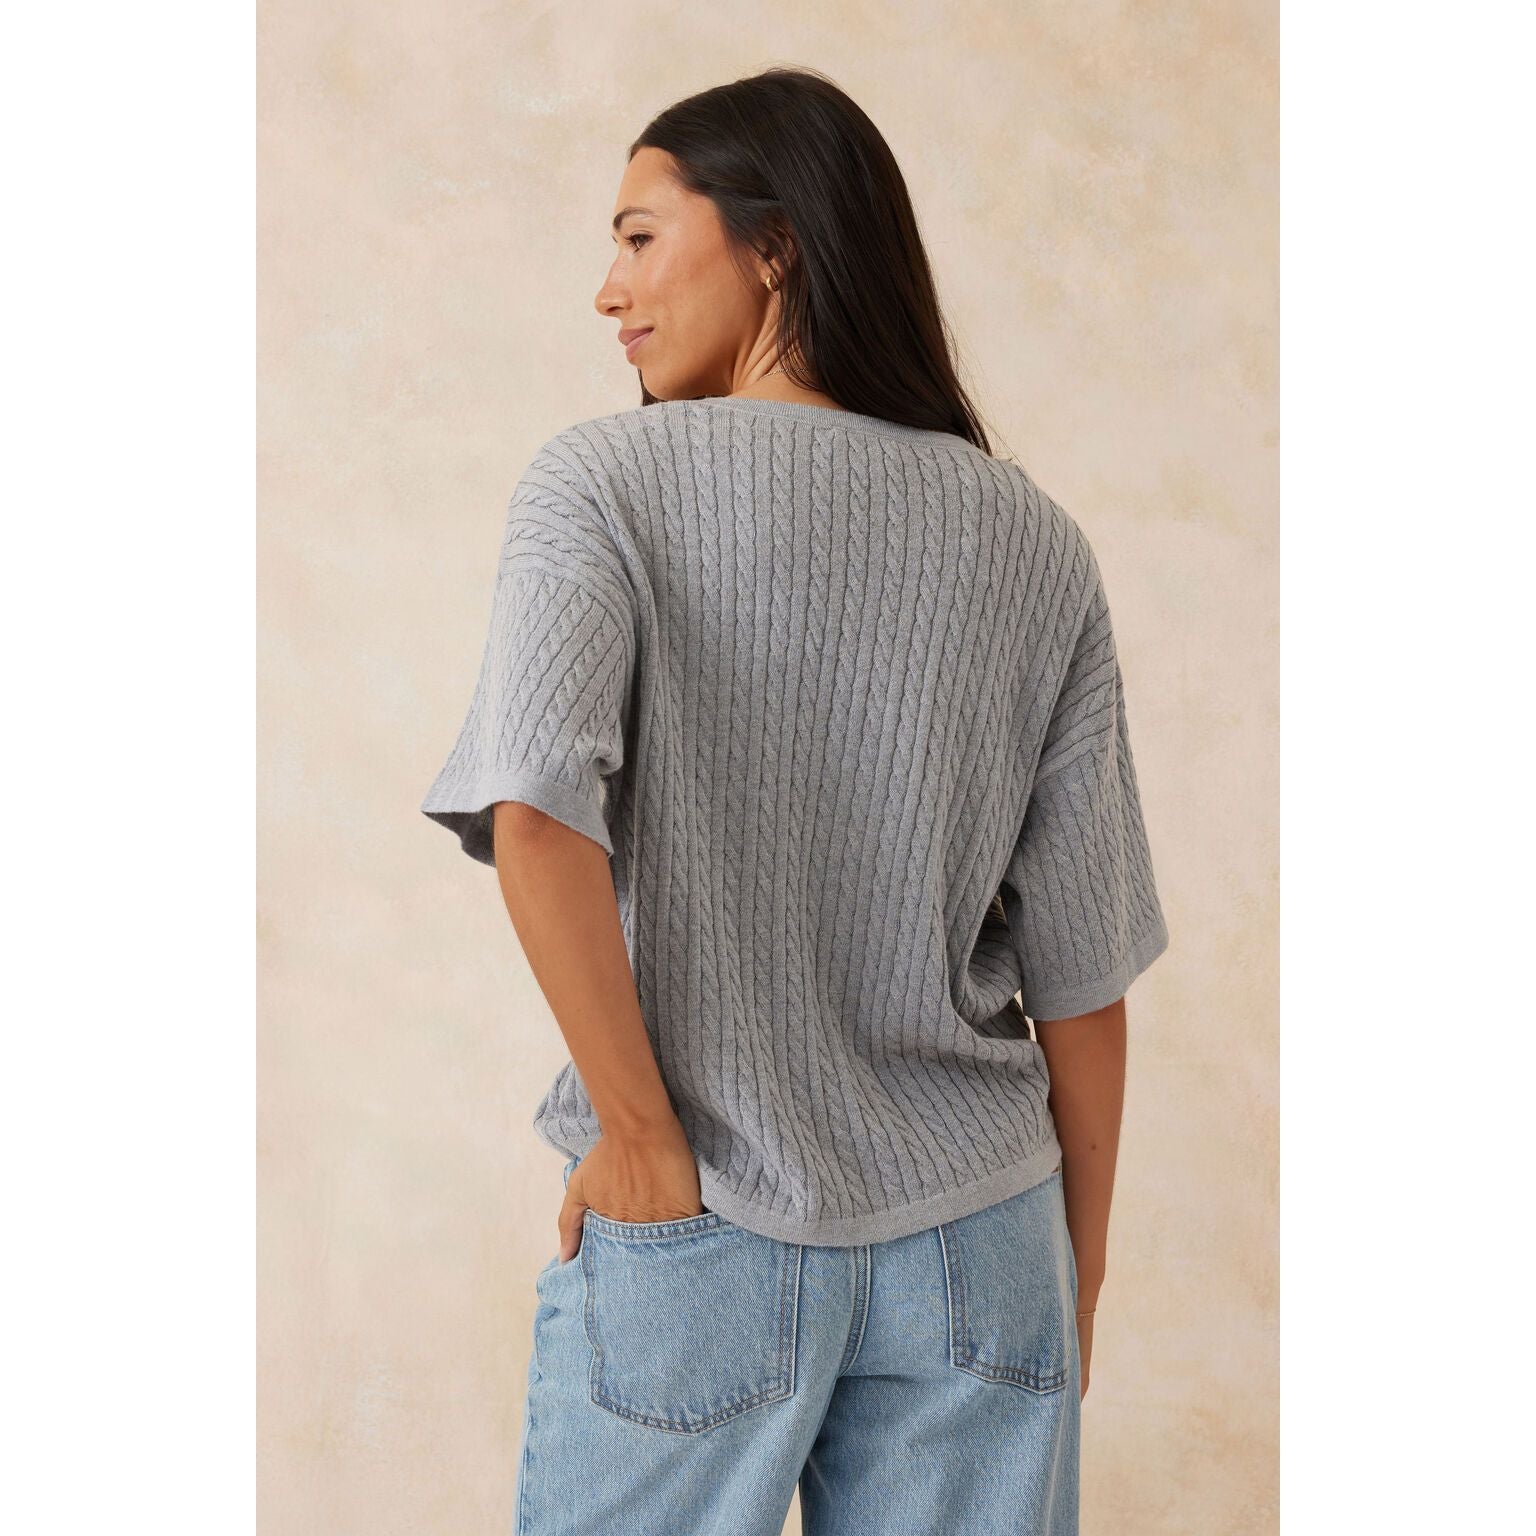 Short Sleeve Soft Cable Knit - Grey Marle